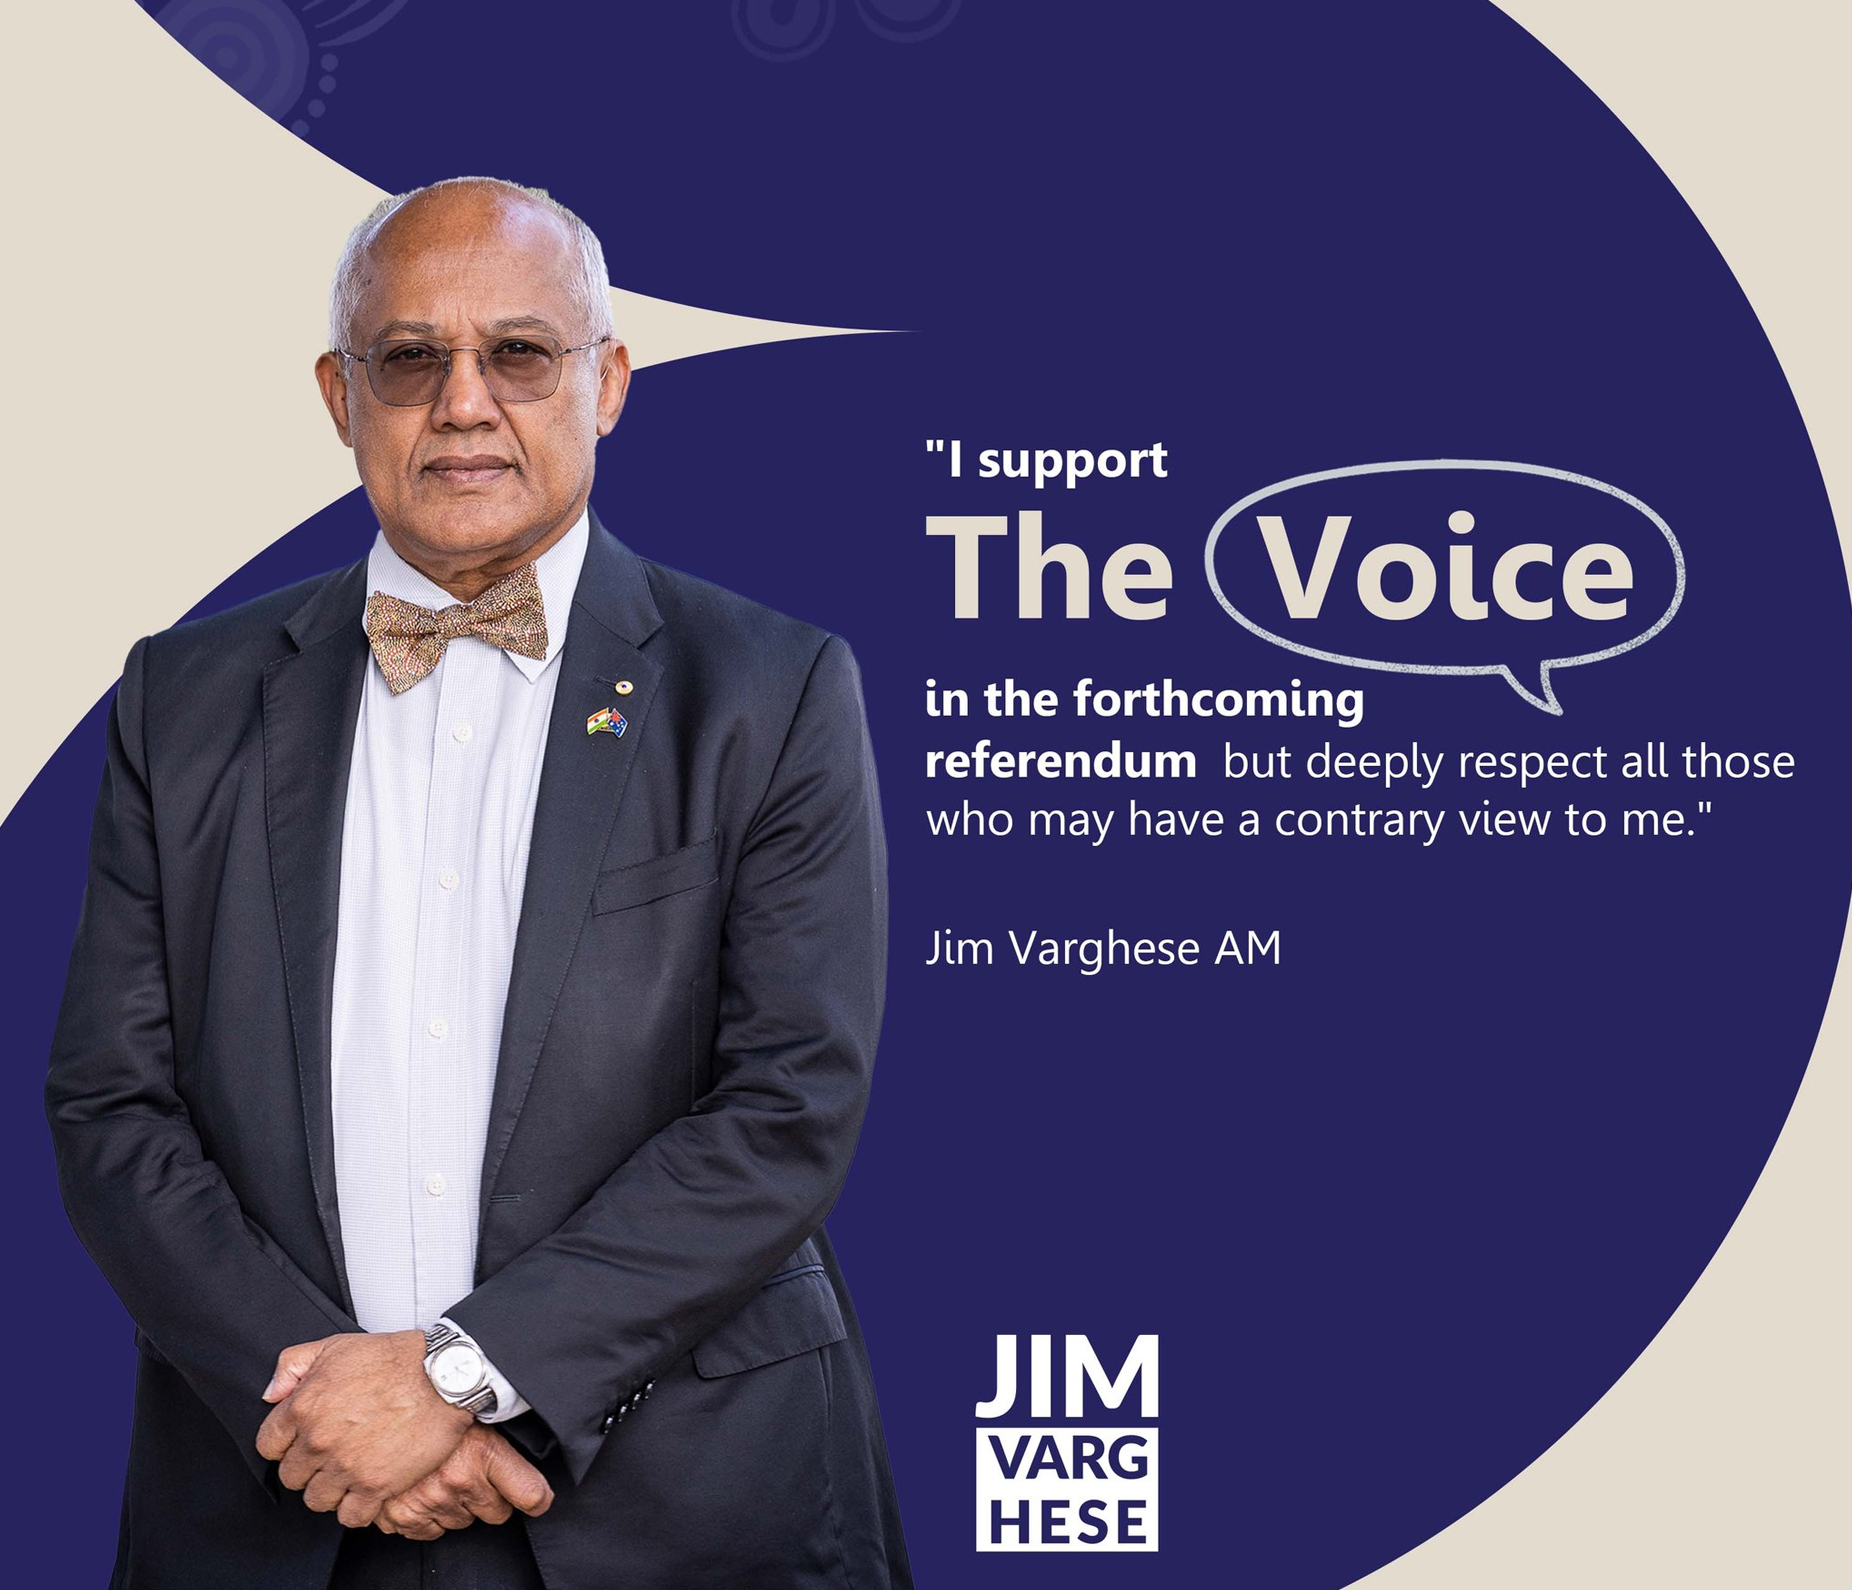 <h5></h5>
<h5 style="text-align: center;"><strong>JIM VARGHESE AM</strong><br />
(The Leadership Group)</h5>
